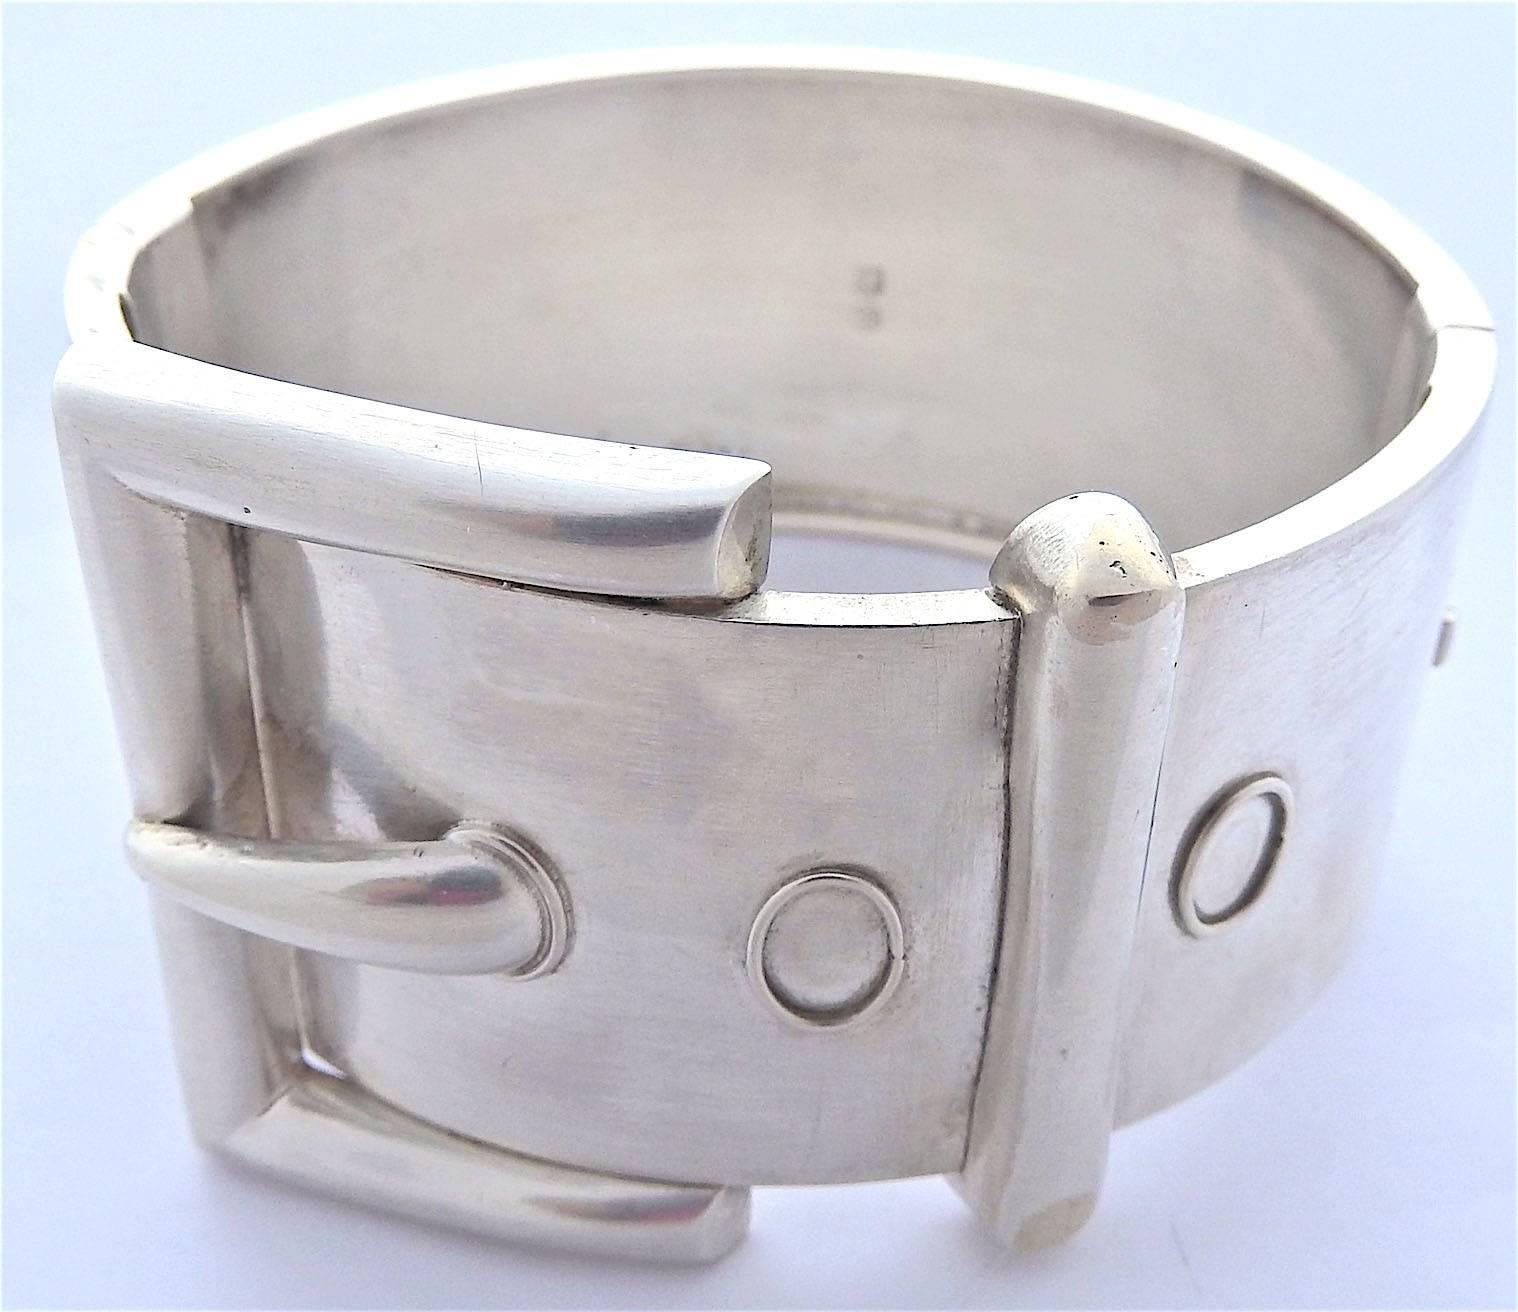 Striking silver Victorian bangle with a bold buckle motif.  Sure to cause admiring glances when worn day or night.  The bracelet measures 1 5/8